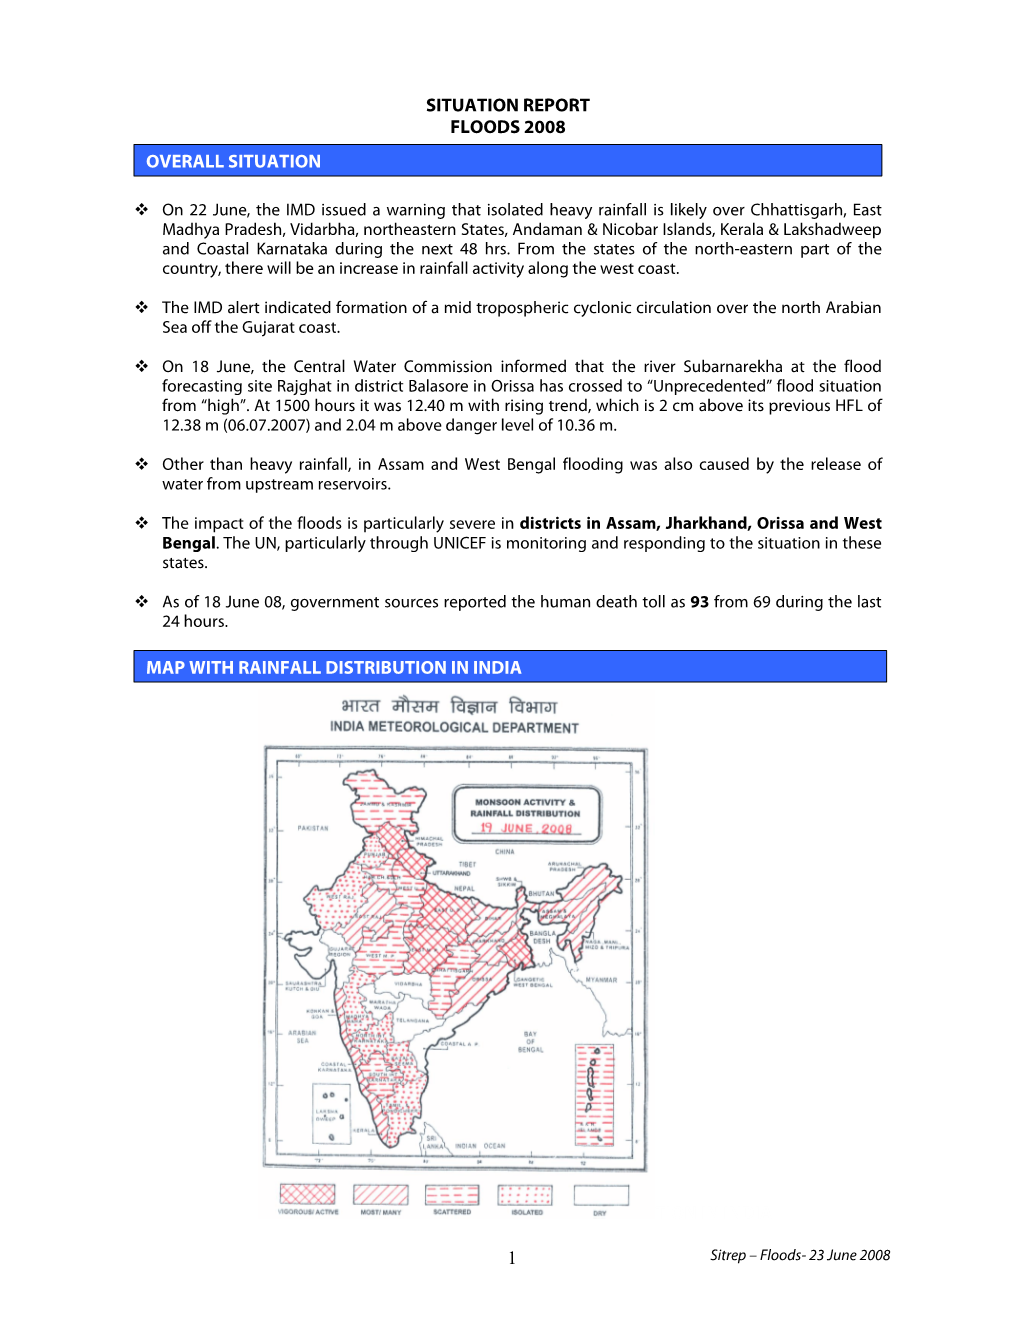 1 Situation Report Floods 2008 Tion in India Overall